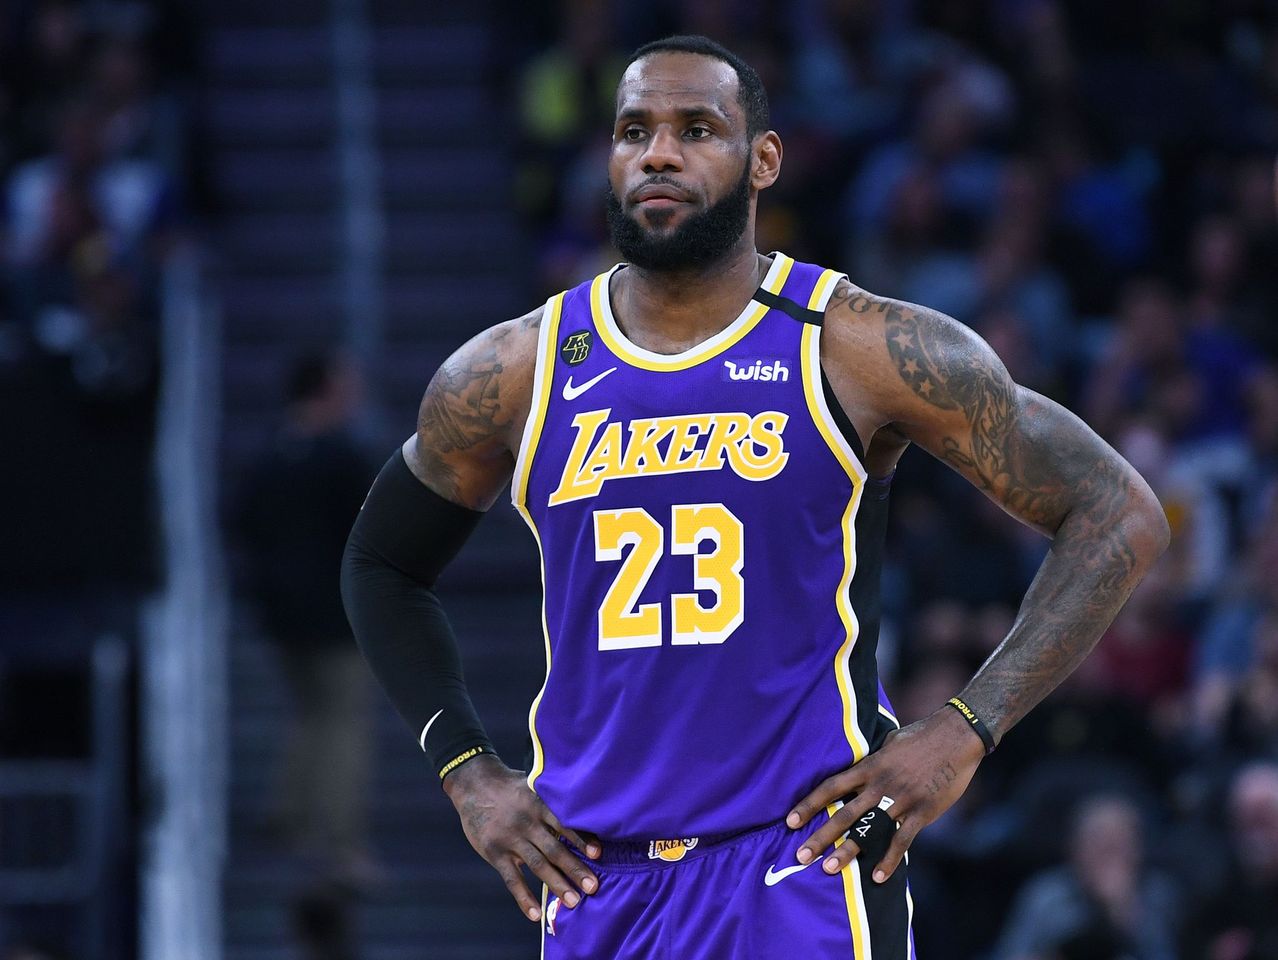 LeBron James #23 of the Los Angeles Lakers looks on against the Golden State Warriors during an NBA basketball game at Chase Center on February 08, 2020. | Source: Getty Images